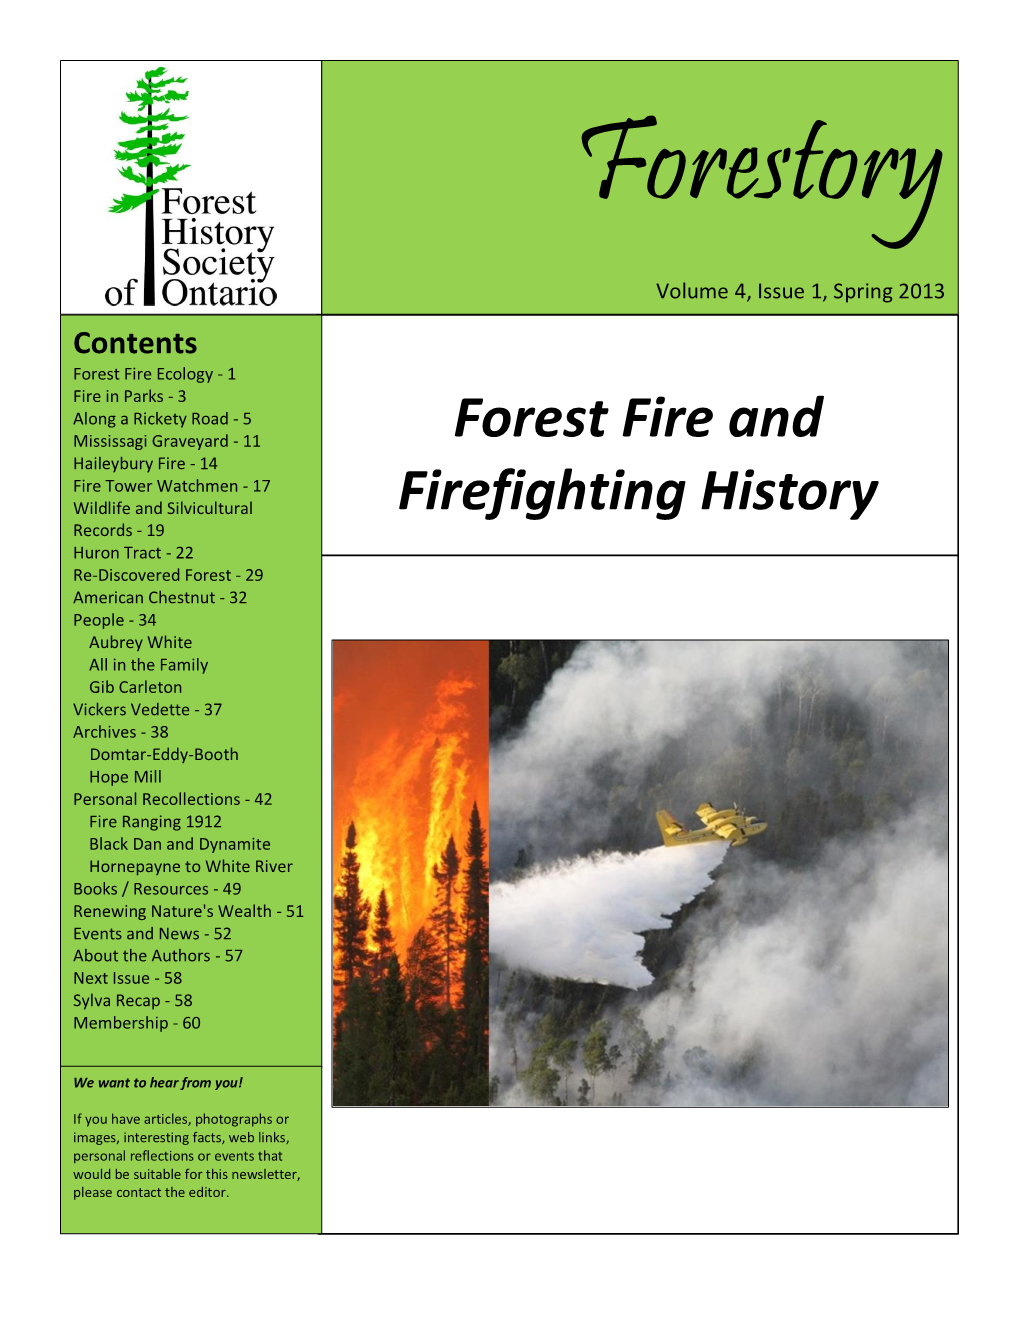 Forest Fire and Firefighting History